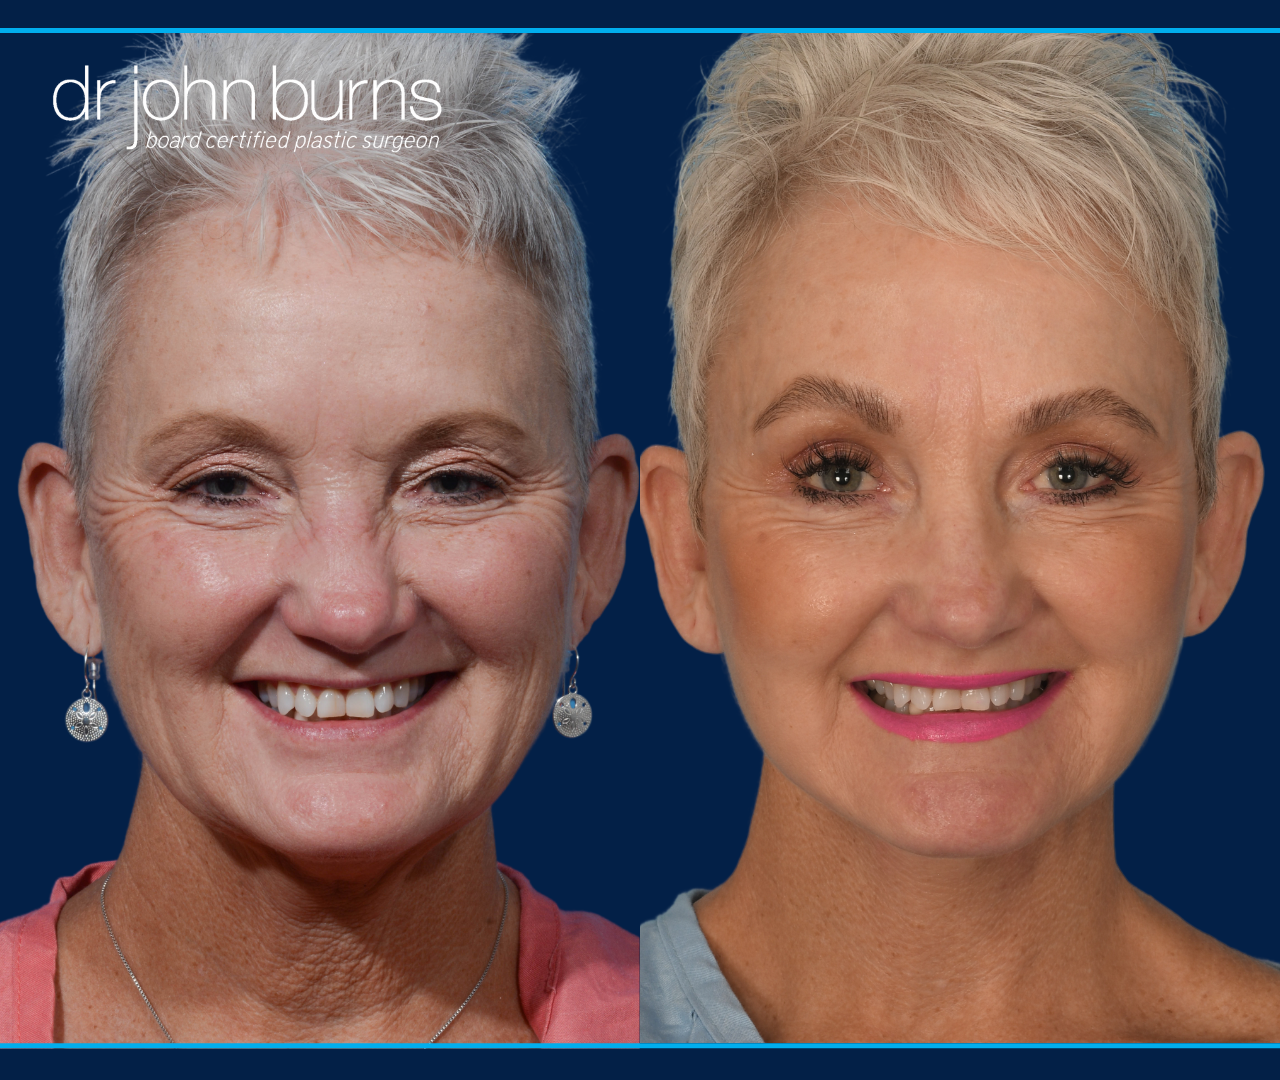 Before and After Facelift + Neck lift with Eyelid lift by Dr. John Burns